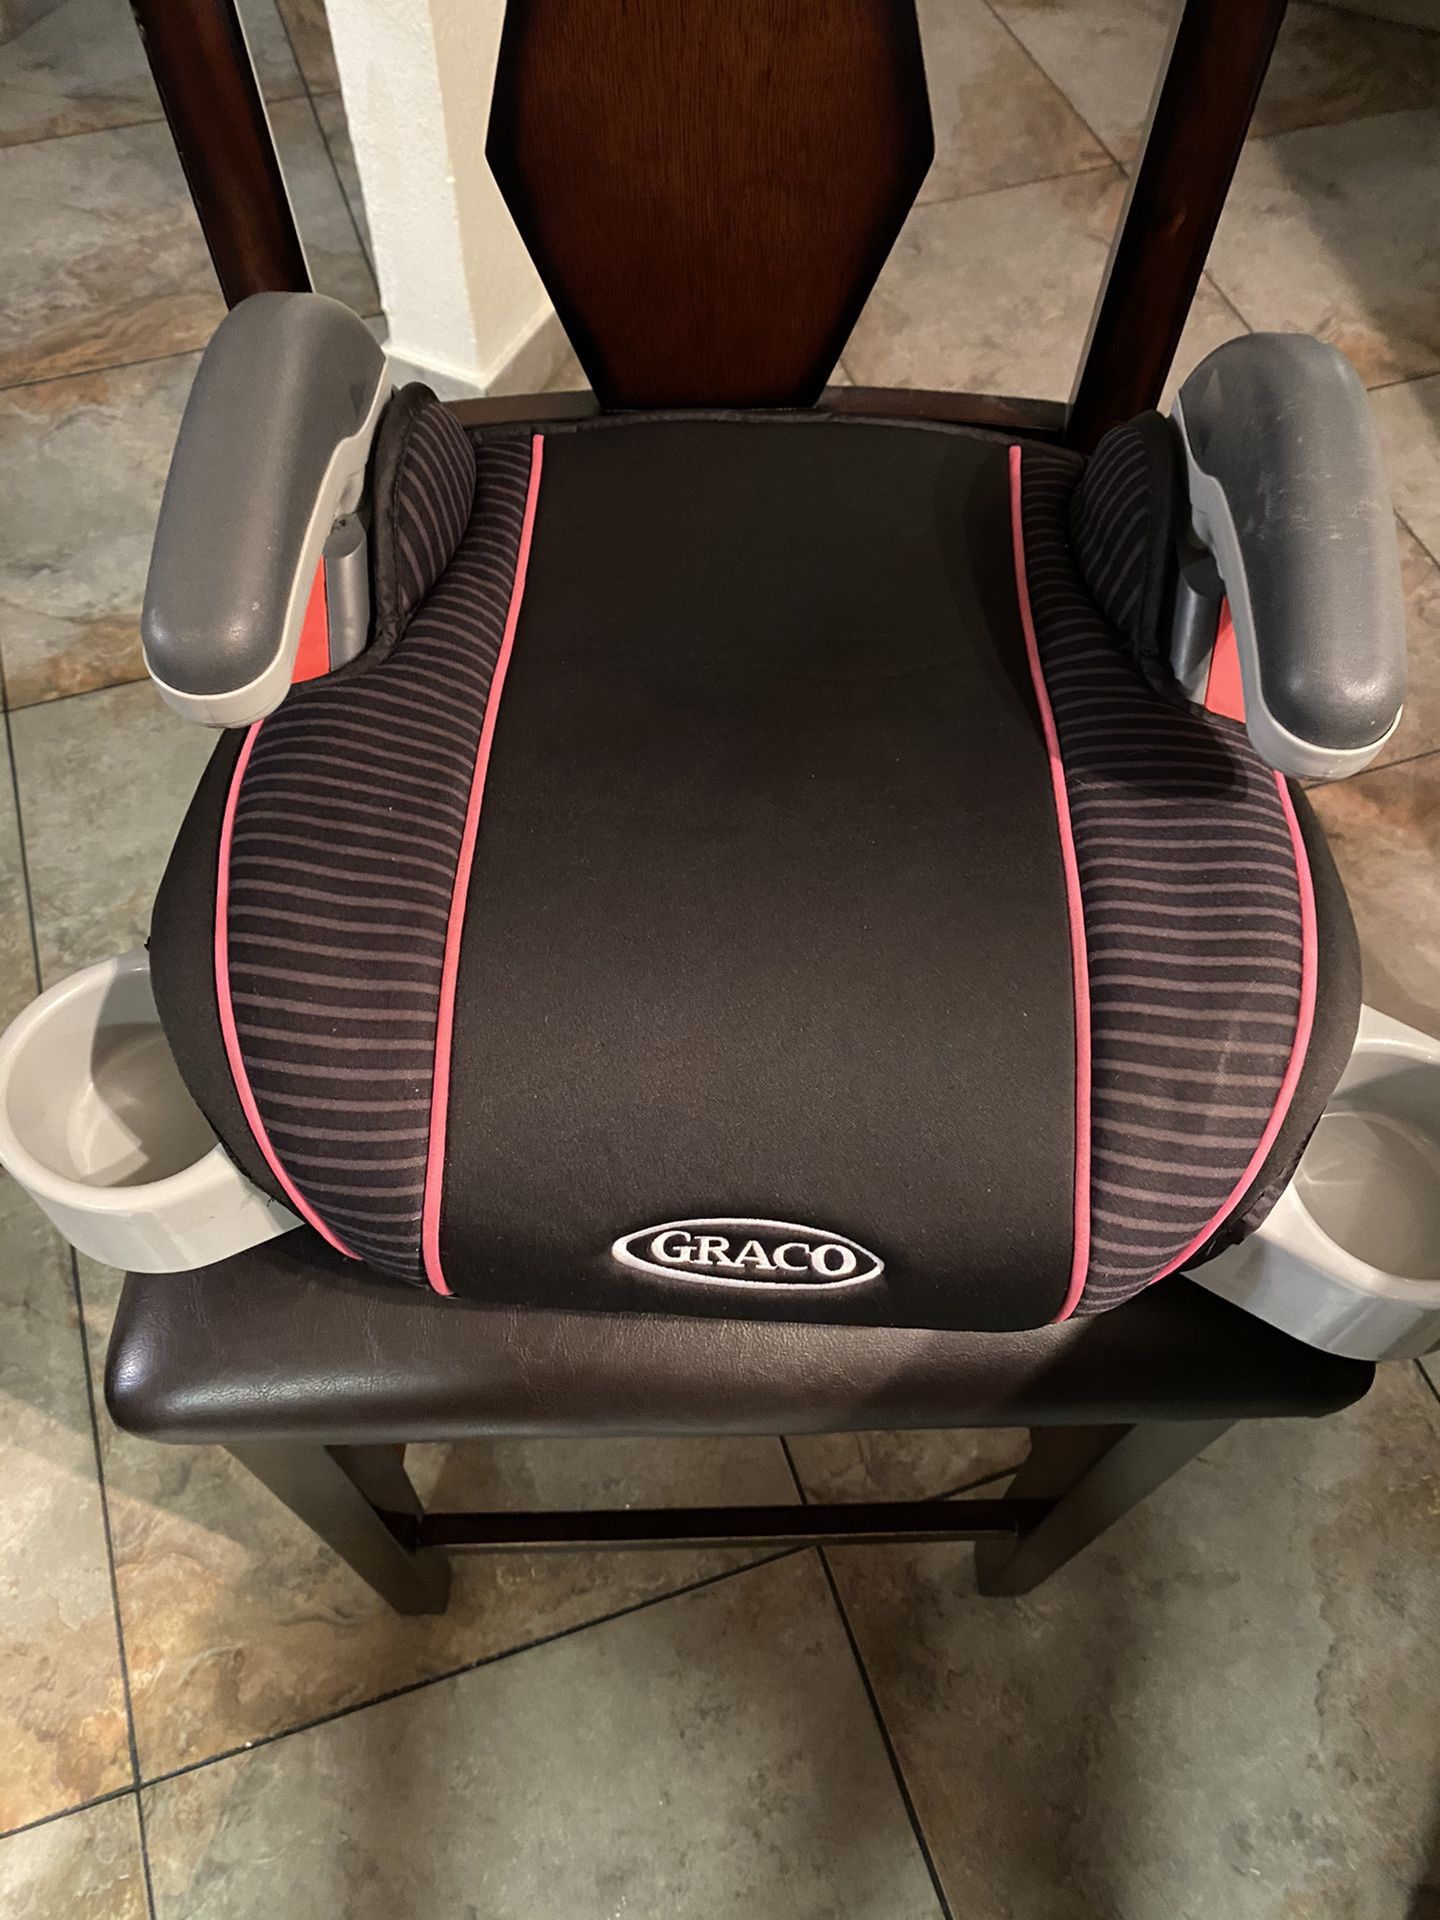 Graco car booster seat chair for child